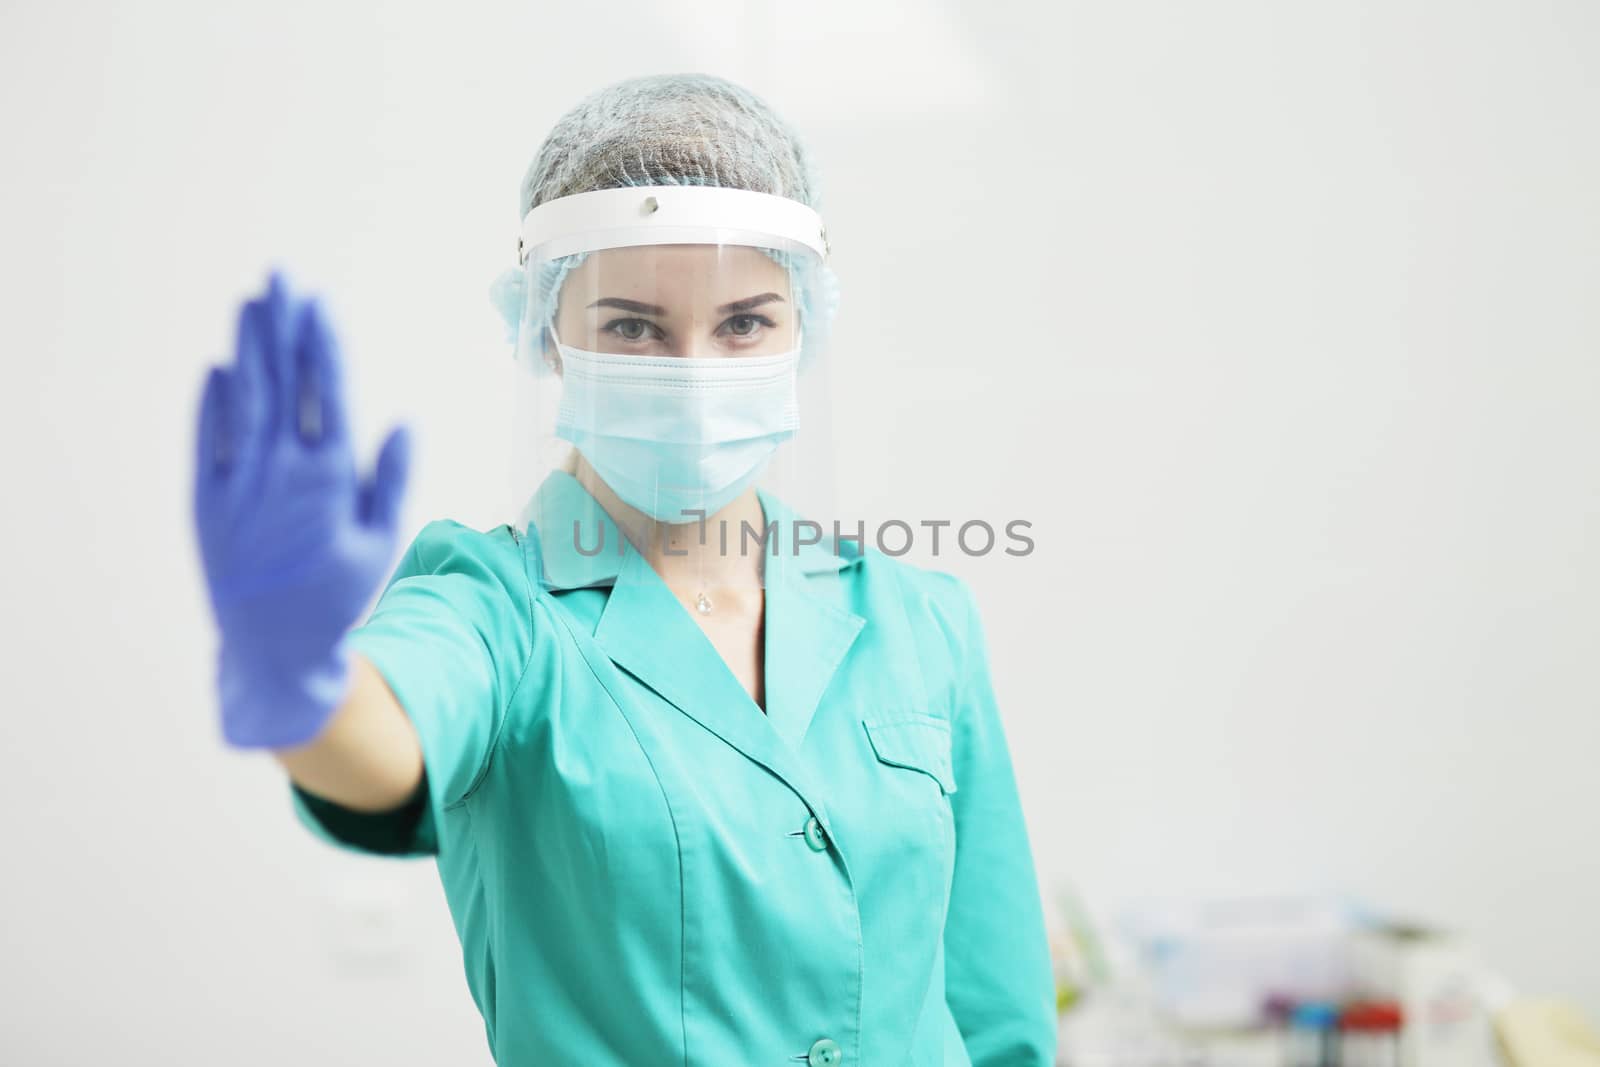 A Female doctor or nurse in uniform, medical mask, protective shield, and gloves shows stop gesture with hand. Coronavirus Covid-19. Girl, woman.